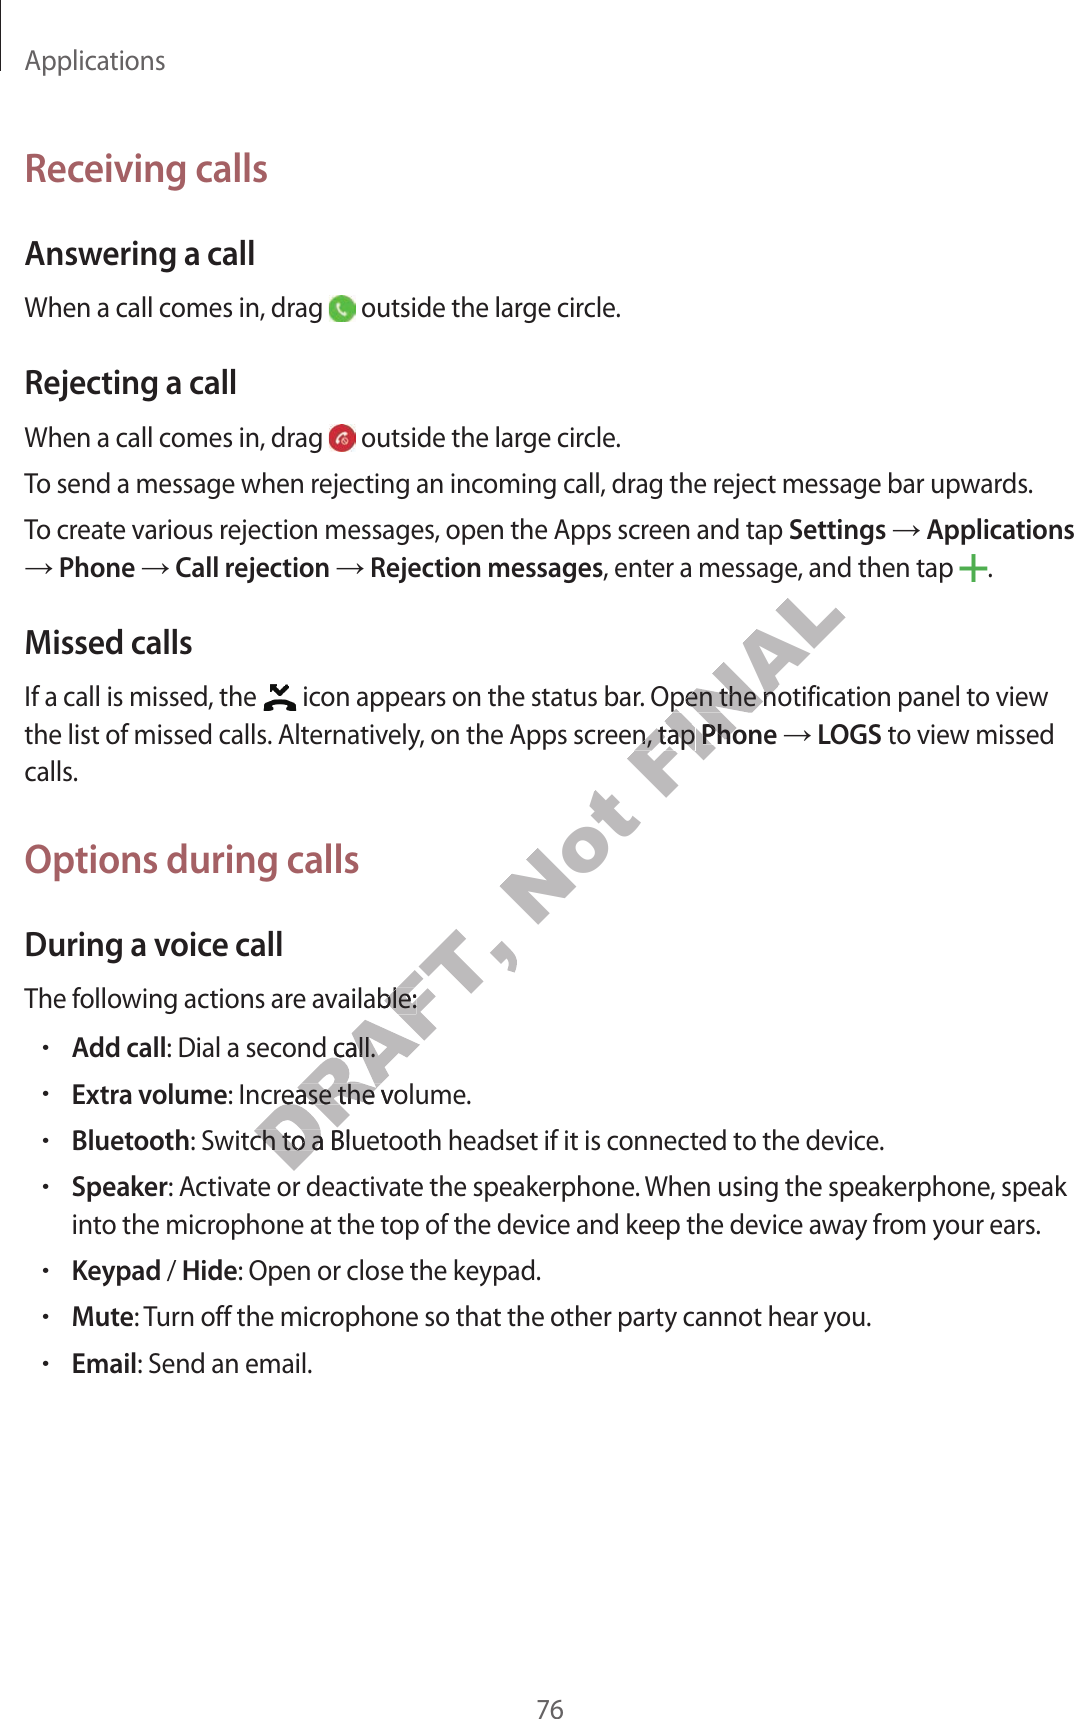 Applications76Receiving callsAnsw ering a callWhen a call comes in, drag   outside the large cir cle .Rejecting a callWhen a call comes in, drag   outside the large cir cle .To send a message when rejecting an incoming call, dr ag the r eject message bar upwards .To creat e various r ejection messages, open the Apps scr een and tap Settings  Applications  Phone  Call r ejection  Rejection messages, enter a message , and then tap  .Missed callsIf a call is missed, the   icon appears on the status bar. Open the notification panel t o view the list of missed calls. Alt ernativ ely, on the Apps scr een, tap Phone  LOGS to view missed calls.Options during callsDuring a voic e callThe f ollowing actions are a vailable:•Add call: Dial a second call.•Extra volume: Increase the volume .•Bluetooth: Switch t o a Bluetooth headset if it is c onnected to the device.•Speaker: Activate or deactivate the speakerphone . When using the speakerphone , speak into the micr ophone at the t op of the device and keep the devic e a wa y fr om y our ears .•Keypad / Hide: Open or close the keypad.•Mute: Turn off the microphone so tha t the other party cannot hear you.•Email: Send an email.DRAFT, The f ollowing actions are a vailable:DRAFT, The f ollowing actions are a vailable:: Dial a second call.DRAFT, : Dial a second call.: Increase the volume .DRAFT, : Increase the volume .: Switch t o a Bluetooth headset if it is c onnected to the device.DRAFT, : Switch t o a Bluetooth headset if it is c onnected to the device.: Activate or deactivate the speakerphone . When using the speakerphone , speak DRAFT, : Activate or deactivate the speakerphone . When using the speakerphone , speak Not FINAL, enter a message , and then tap FINAL, enter a message , and then tap  icon appears on the status bar. Open the notification panel to view FINAL icon appears on the status bar. Open the notification panel to view the list of missed calls. Alt ernativ ely, on the Apps scr een, tap FINALthe list of missed calls. Alt ernativ ely, on the Apps scr een, tap PhoneFINALPhone